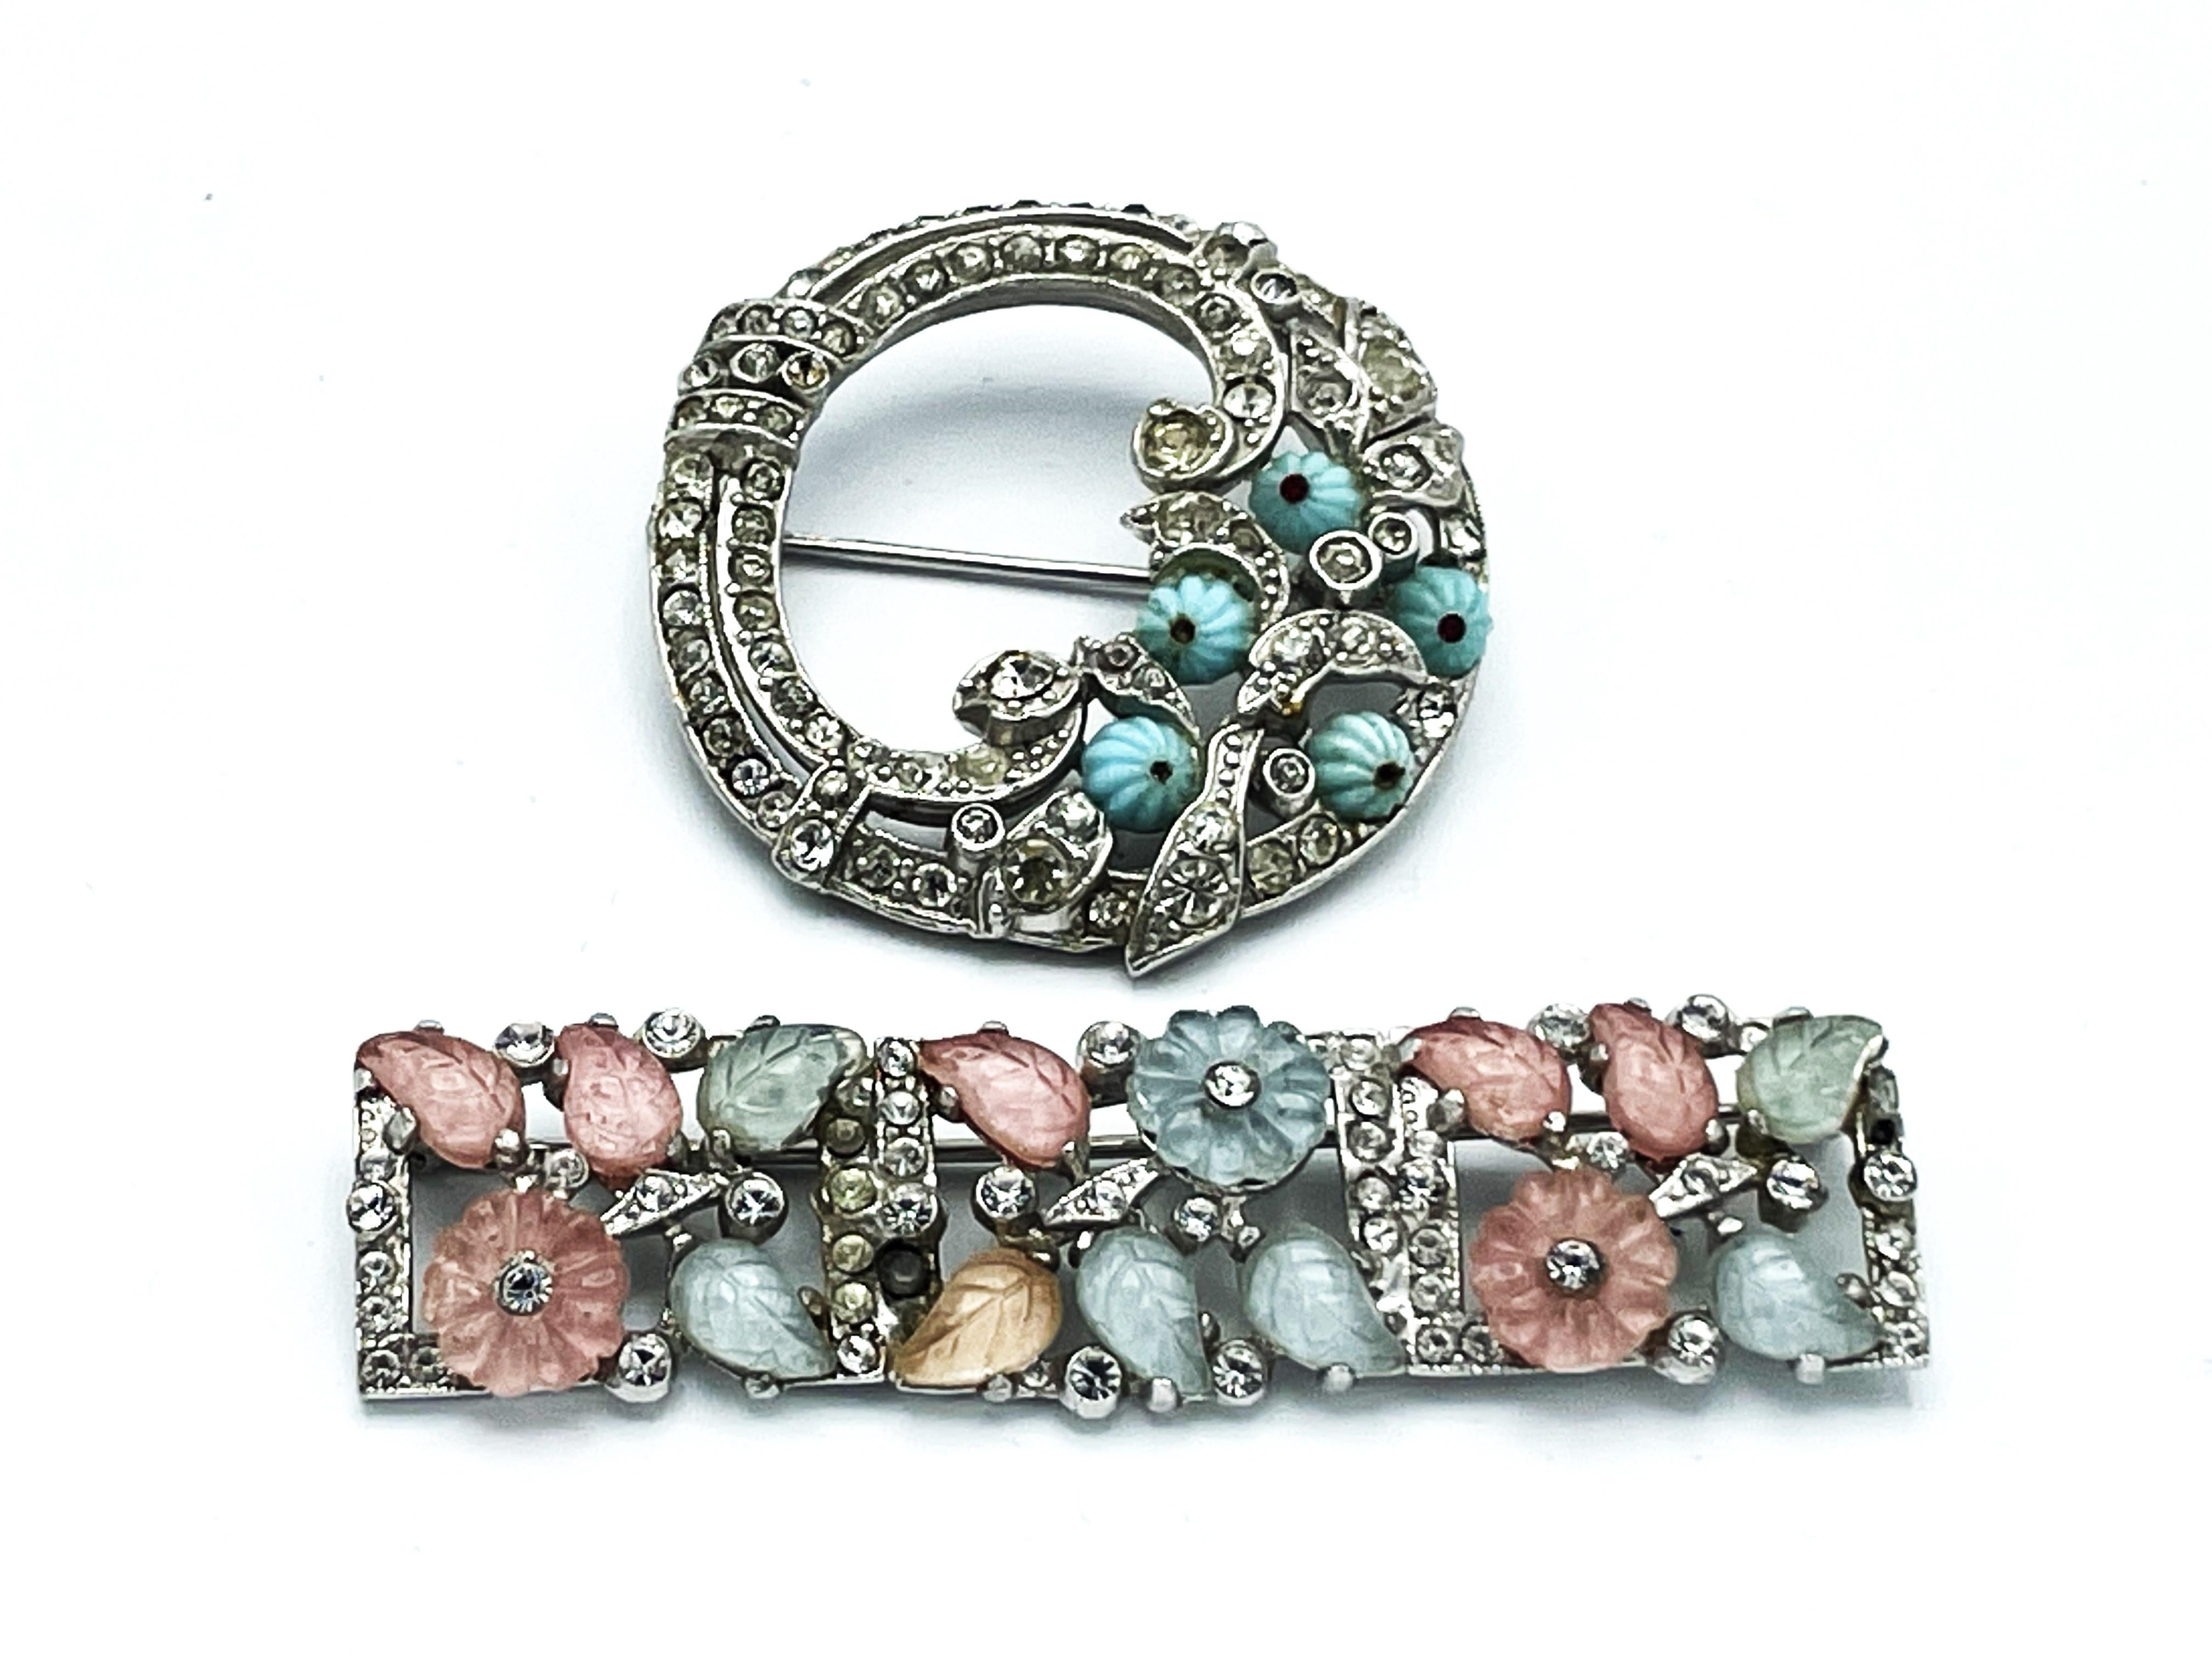 
A narrow bar brooch with rose and light blue glass flowers and small leaves, surrounded by many small rhinestones. The small flowers and leaves were not ground, but the liquid glass was poured into the mold. Made in the USA 1940s.
A rhinestone is